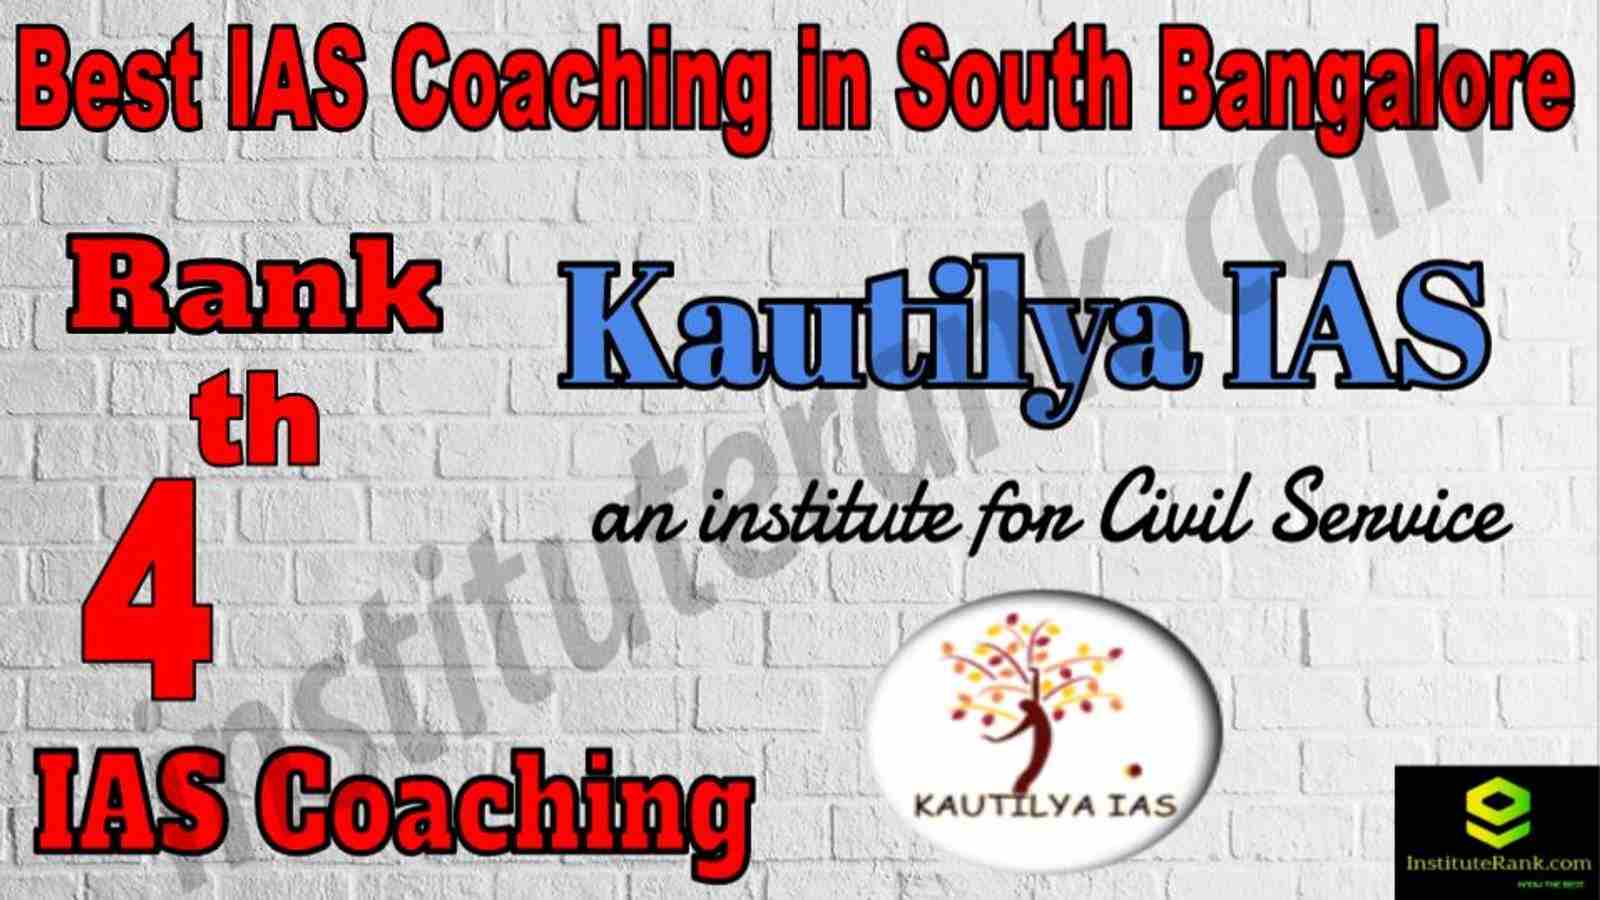 4th Best IAS Coaching in South Bangalore